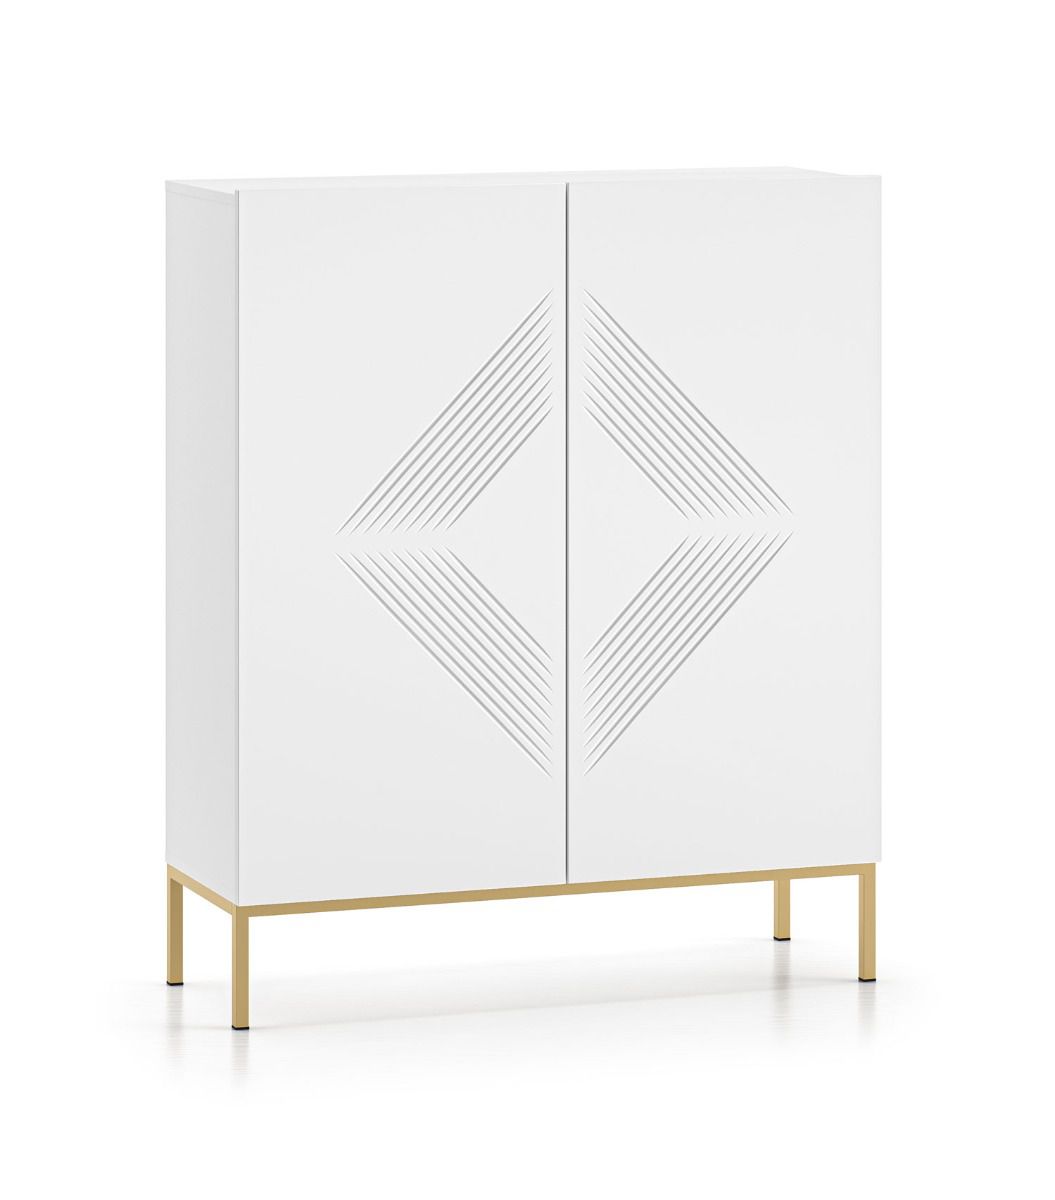 Chest of drawers with three compartments Taos 04, with modern pattern, color: white matt, legs: metal, dimensions: 120 x 100 x 37 cm, for living room, with two doors